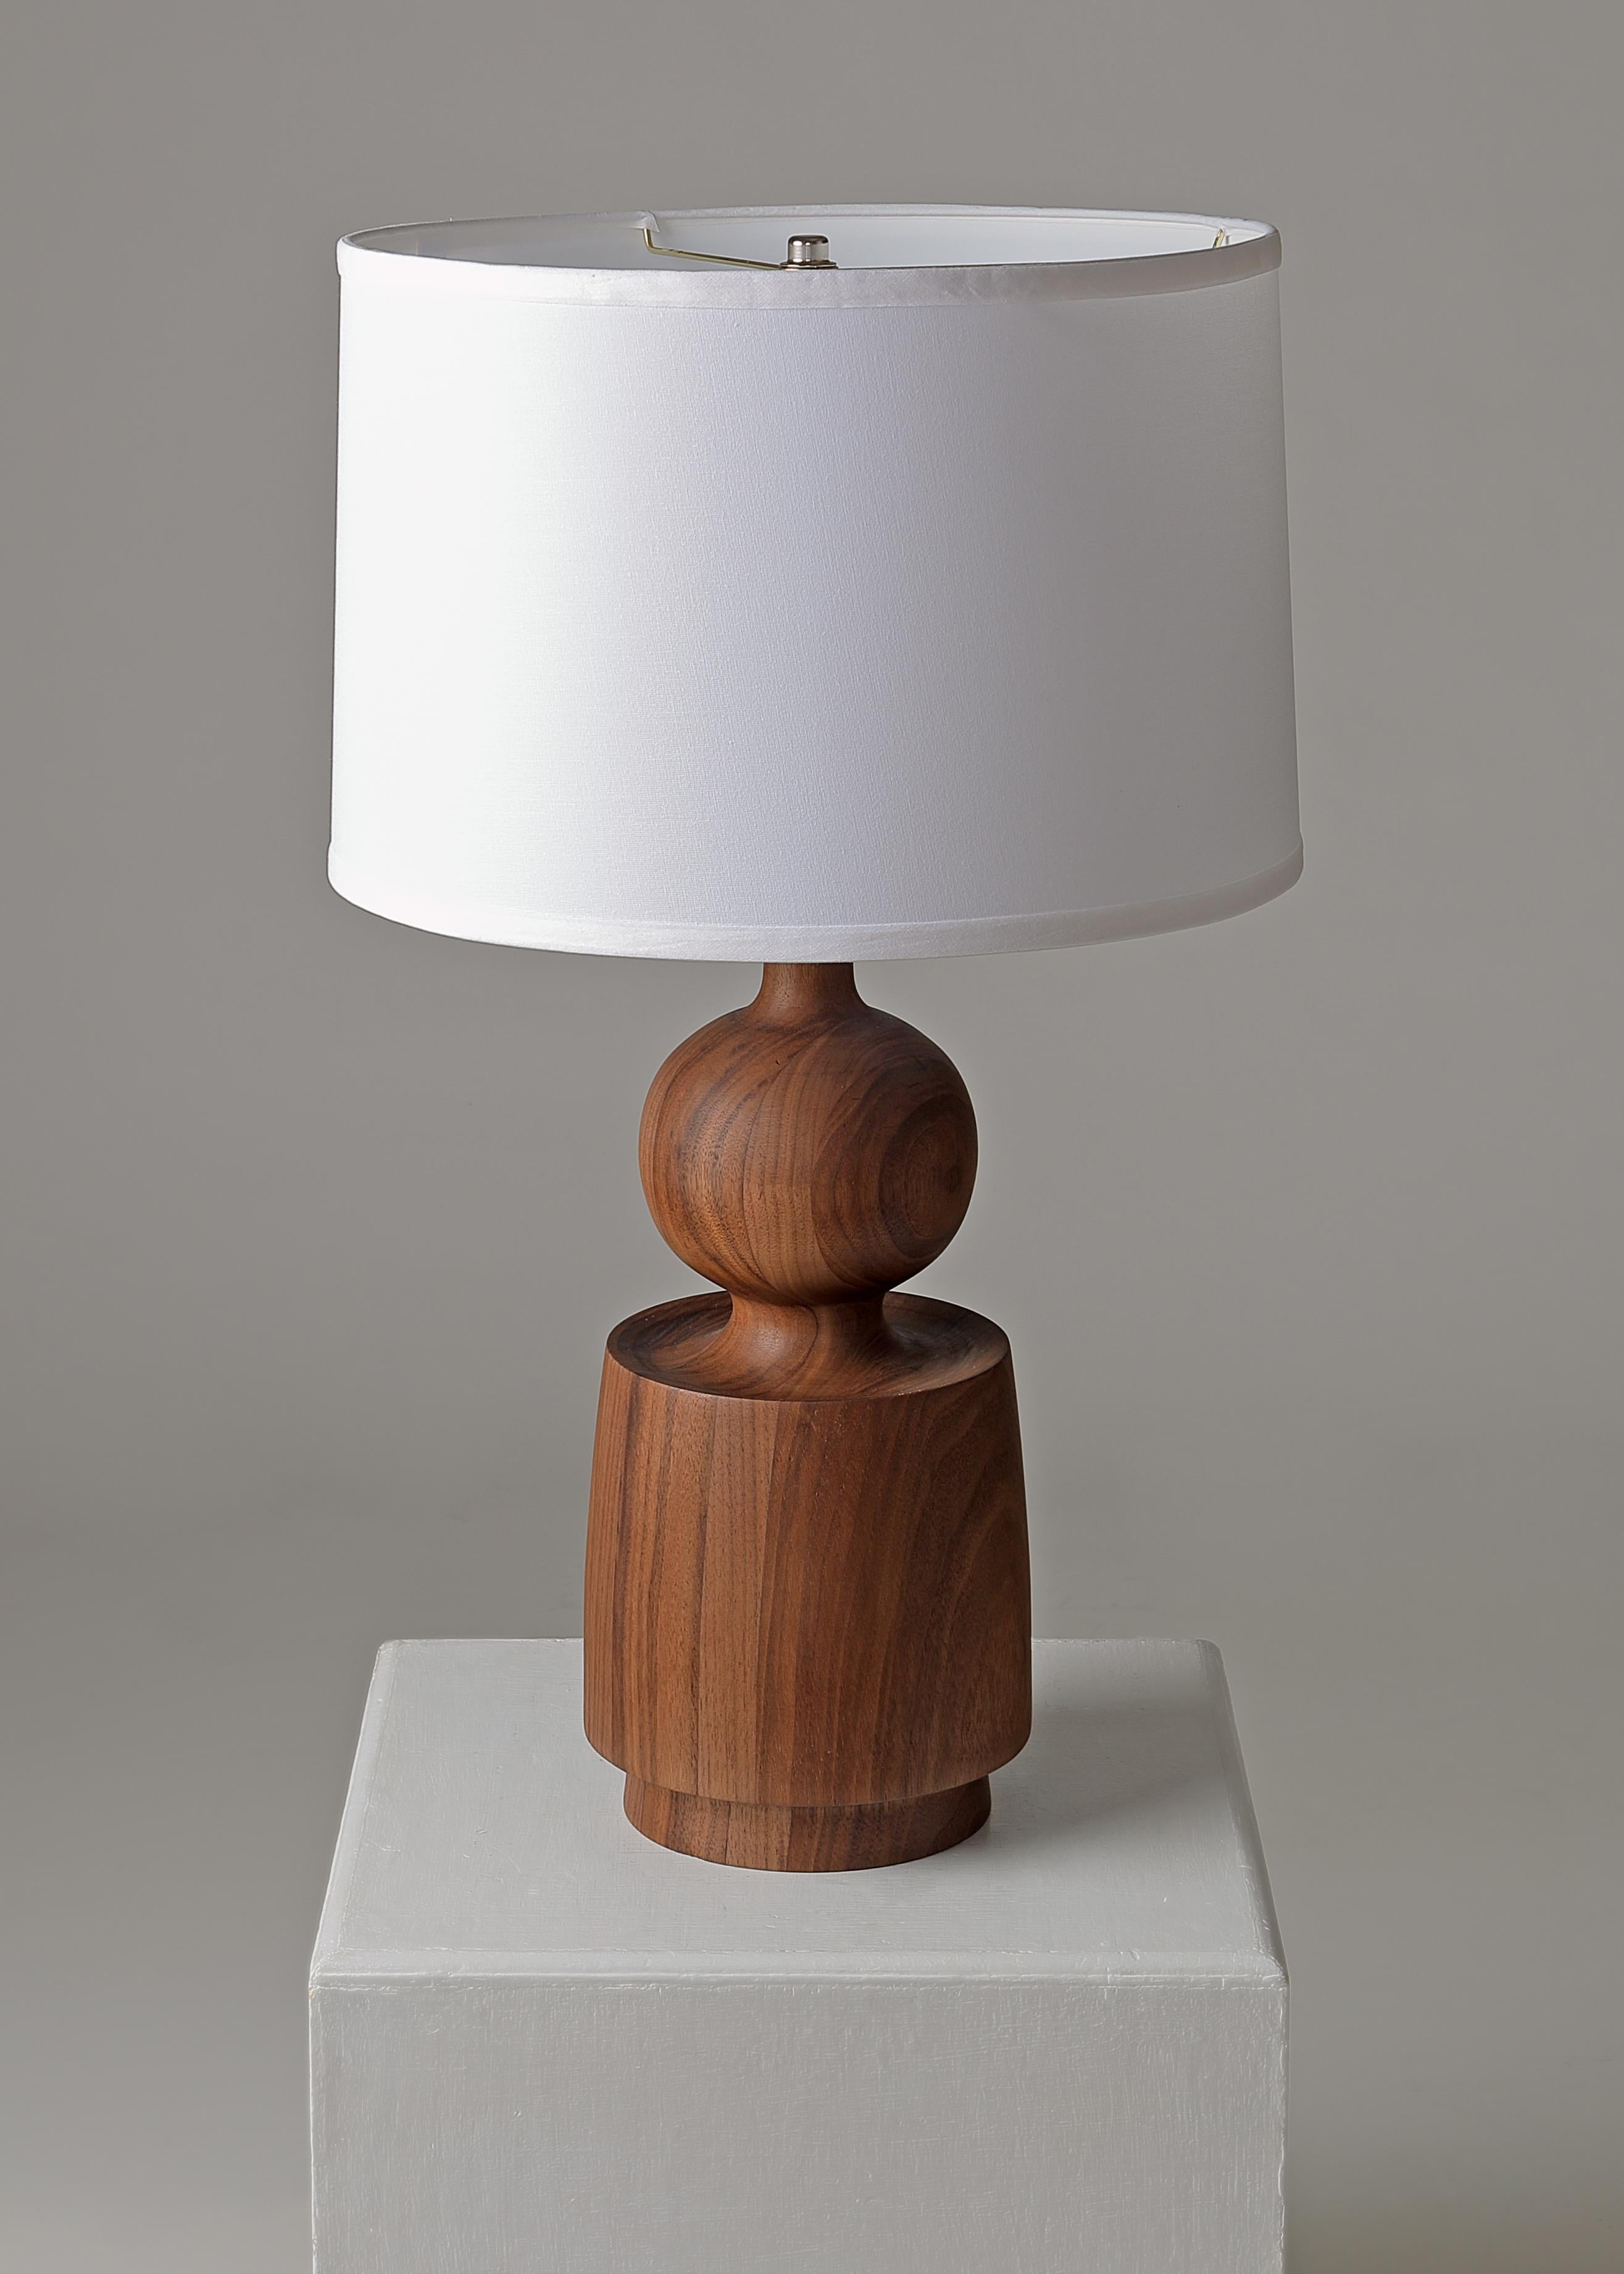 Lathe turned walnut table lamp 27 x 7 x 7 form (TWLB) by Michael Rozell. A similar, slightly taller model is listed, too. 
